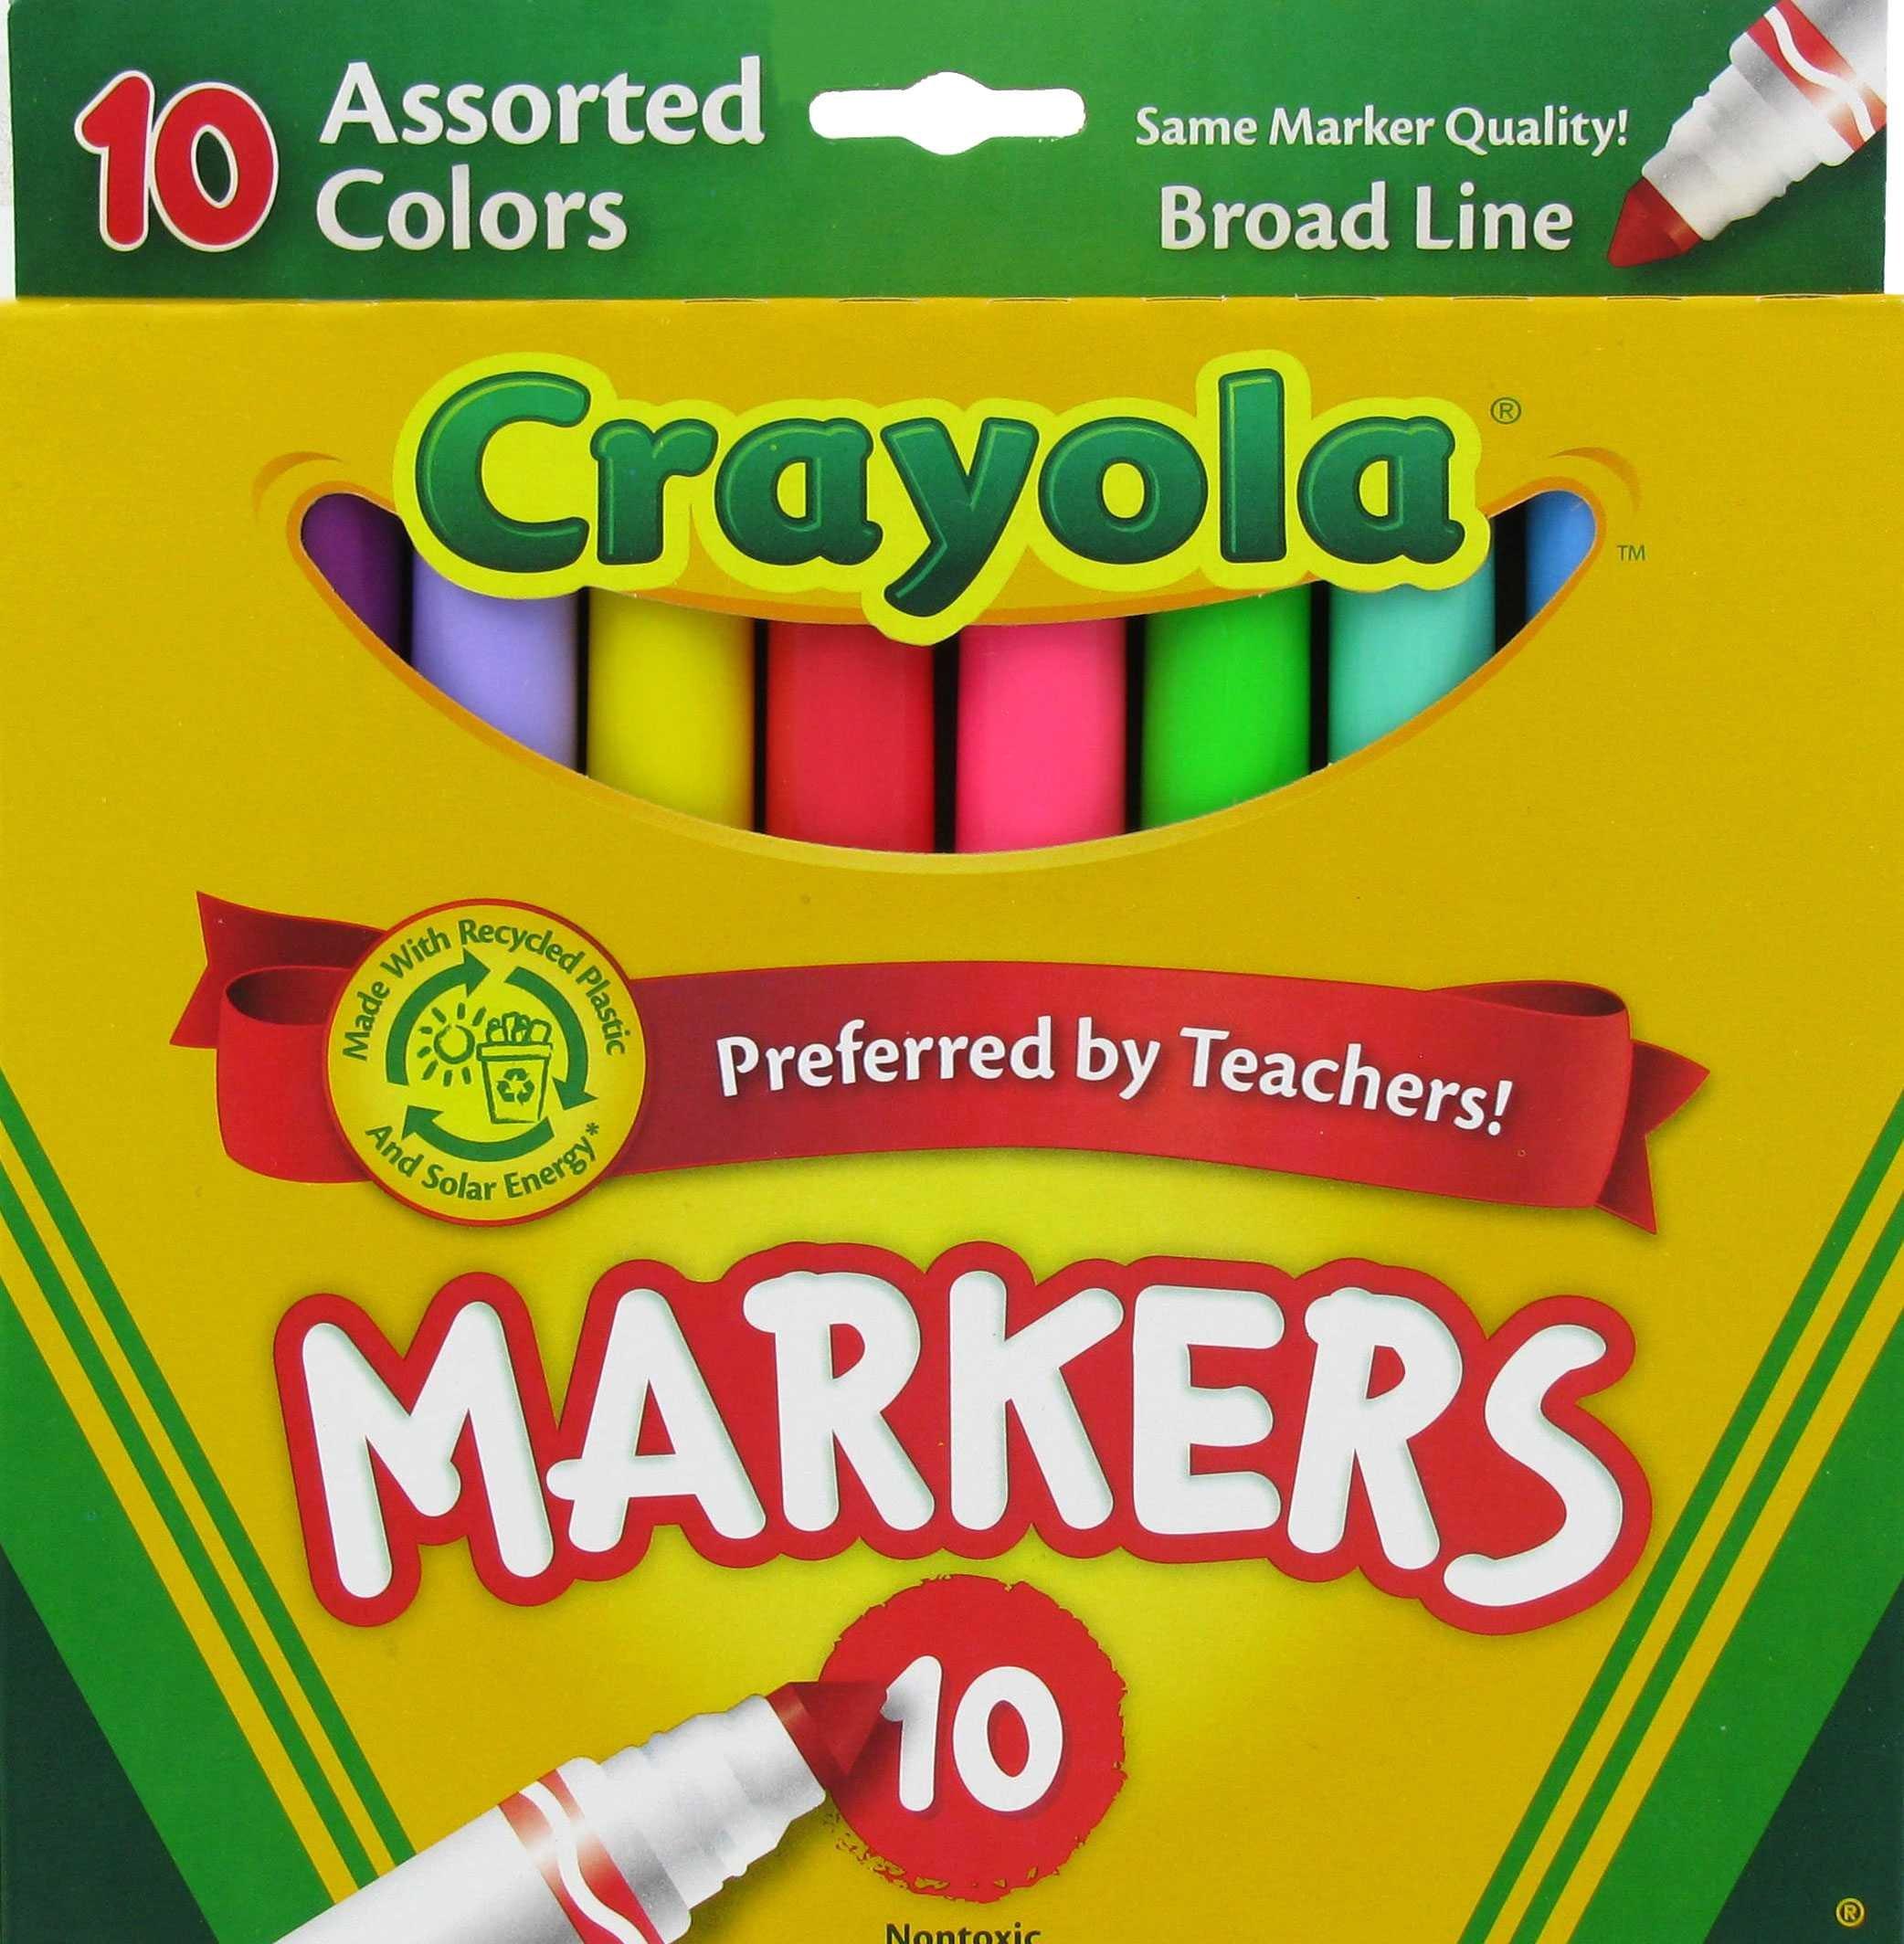 Poster Markers - 5 Piece Set, Hobby Lobby